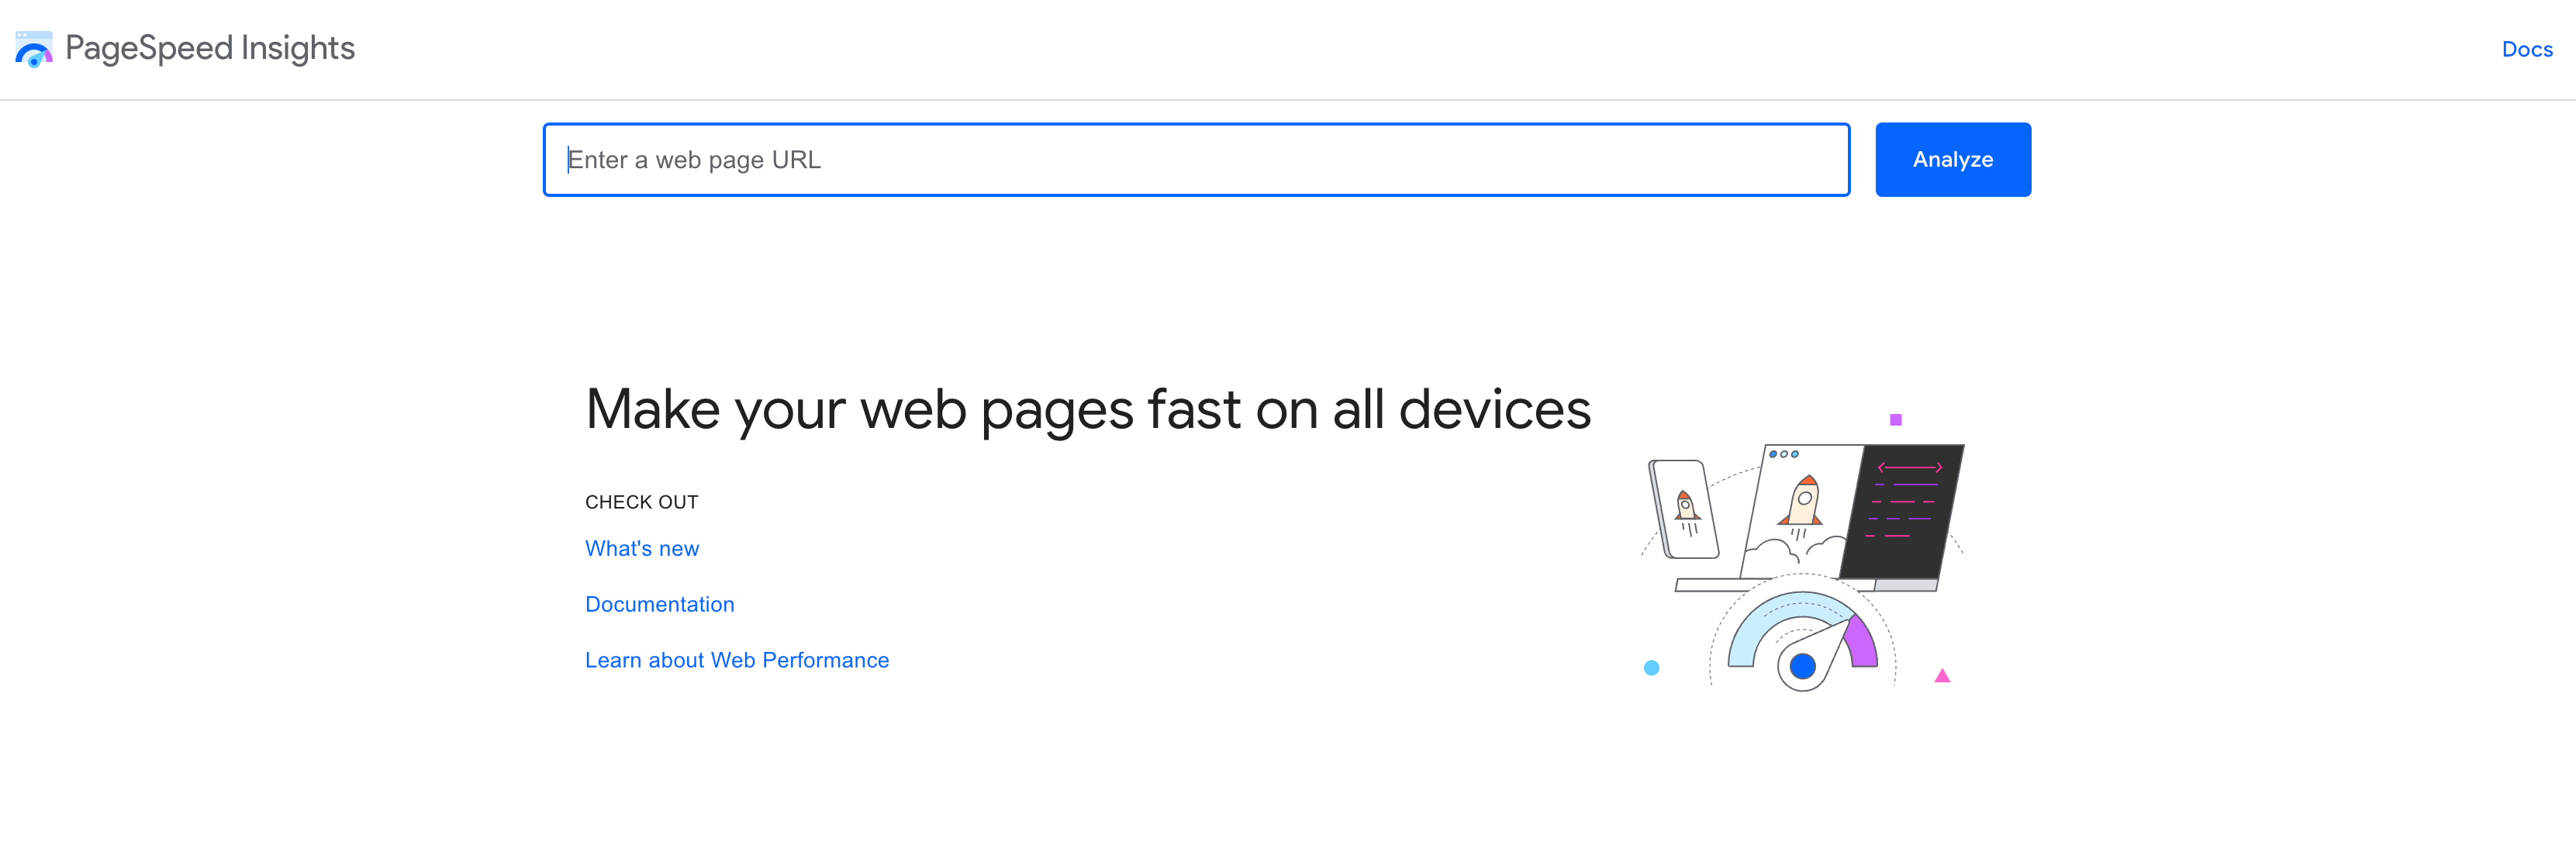 PageSpeed Insights : pour tester un site web